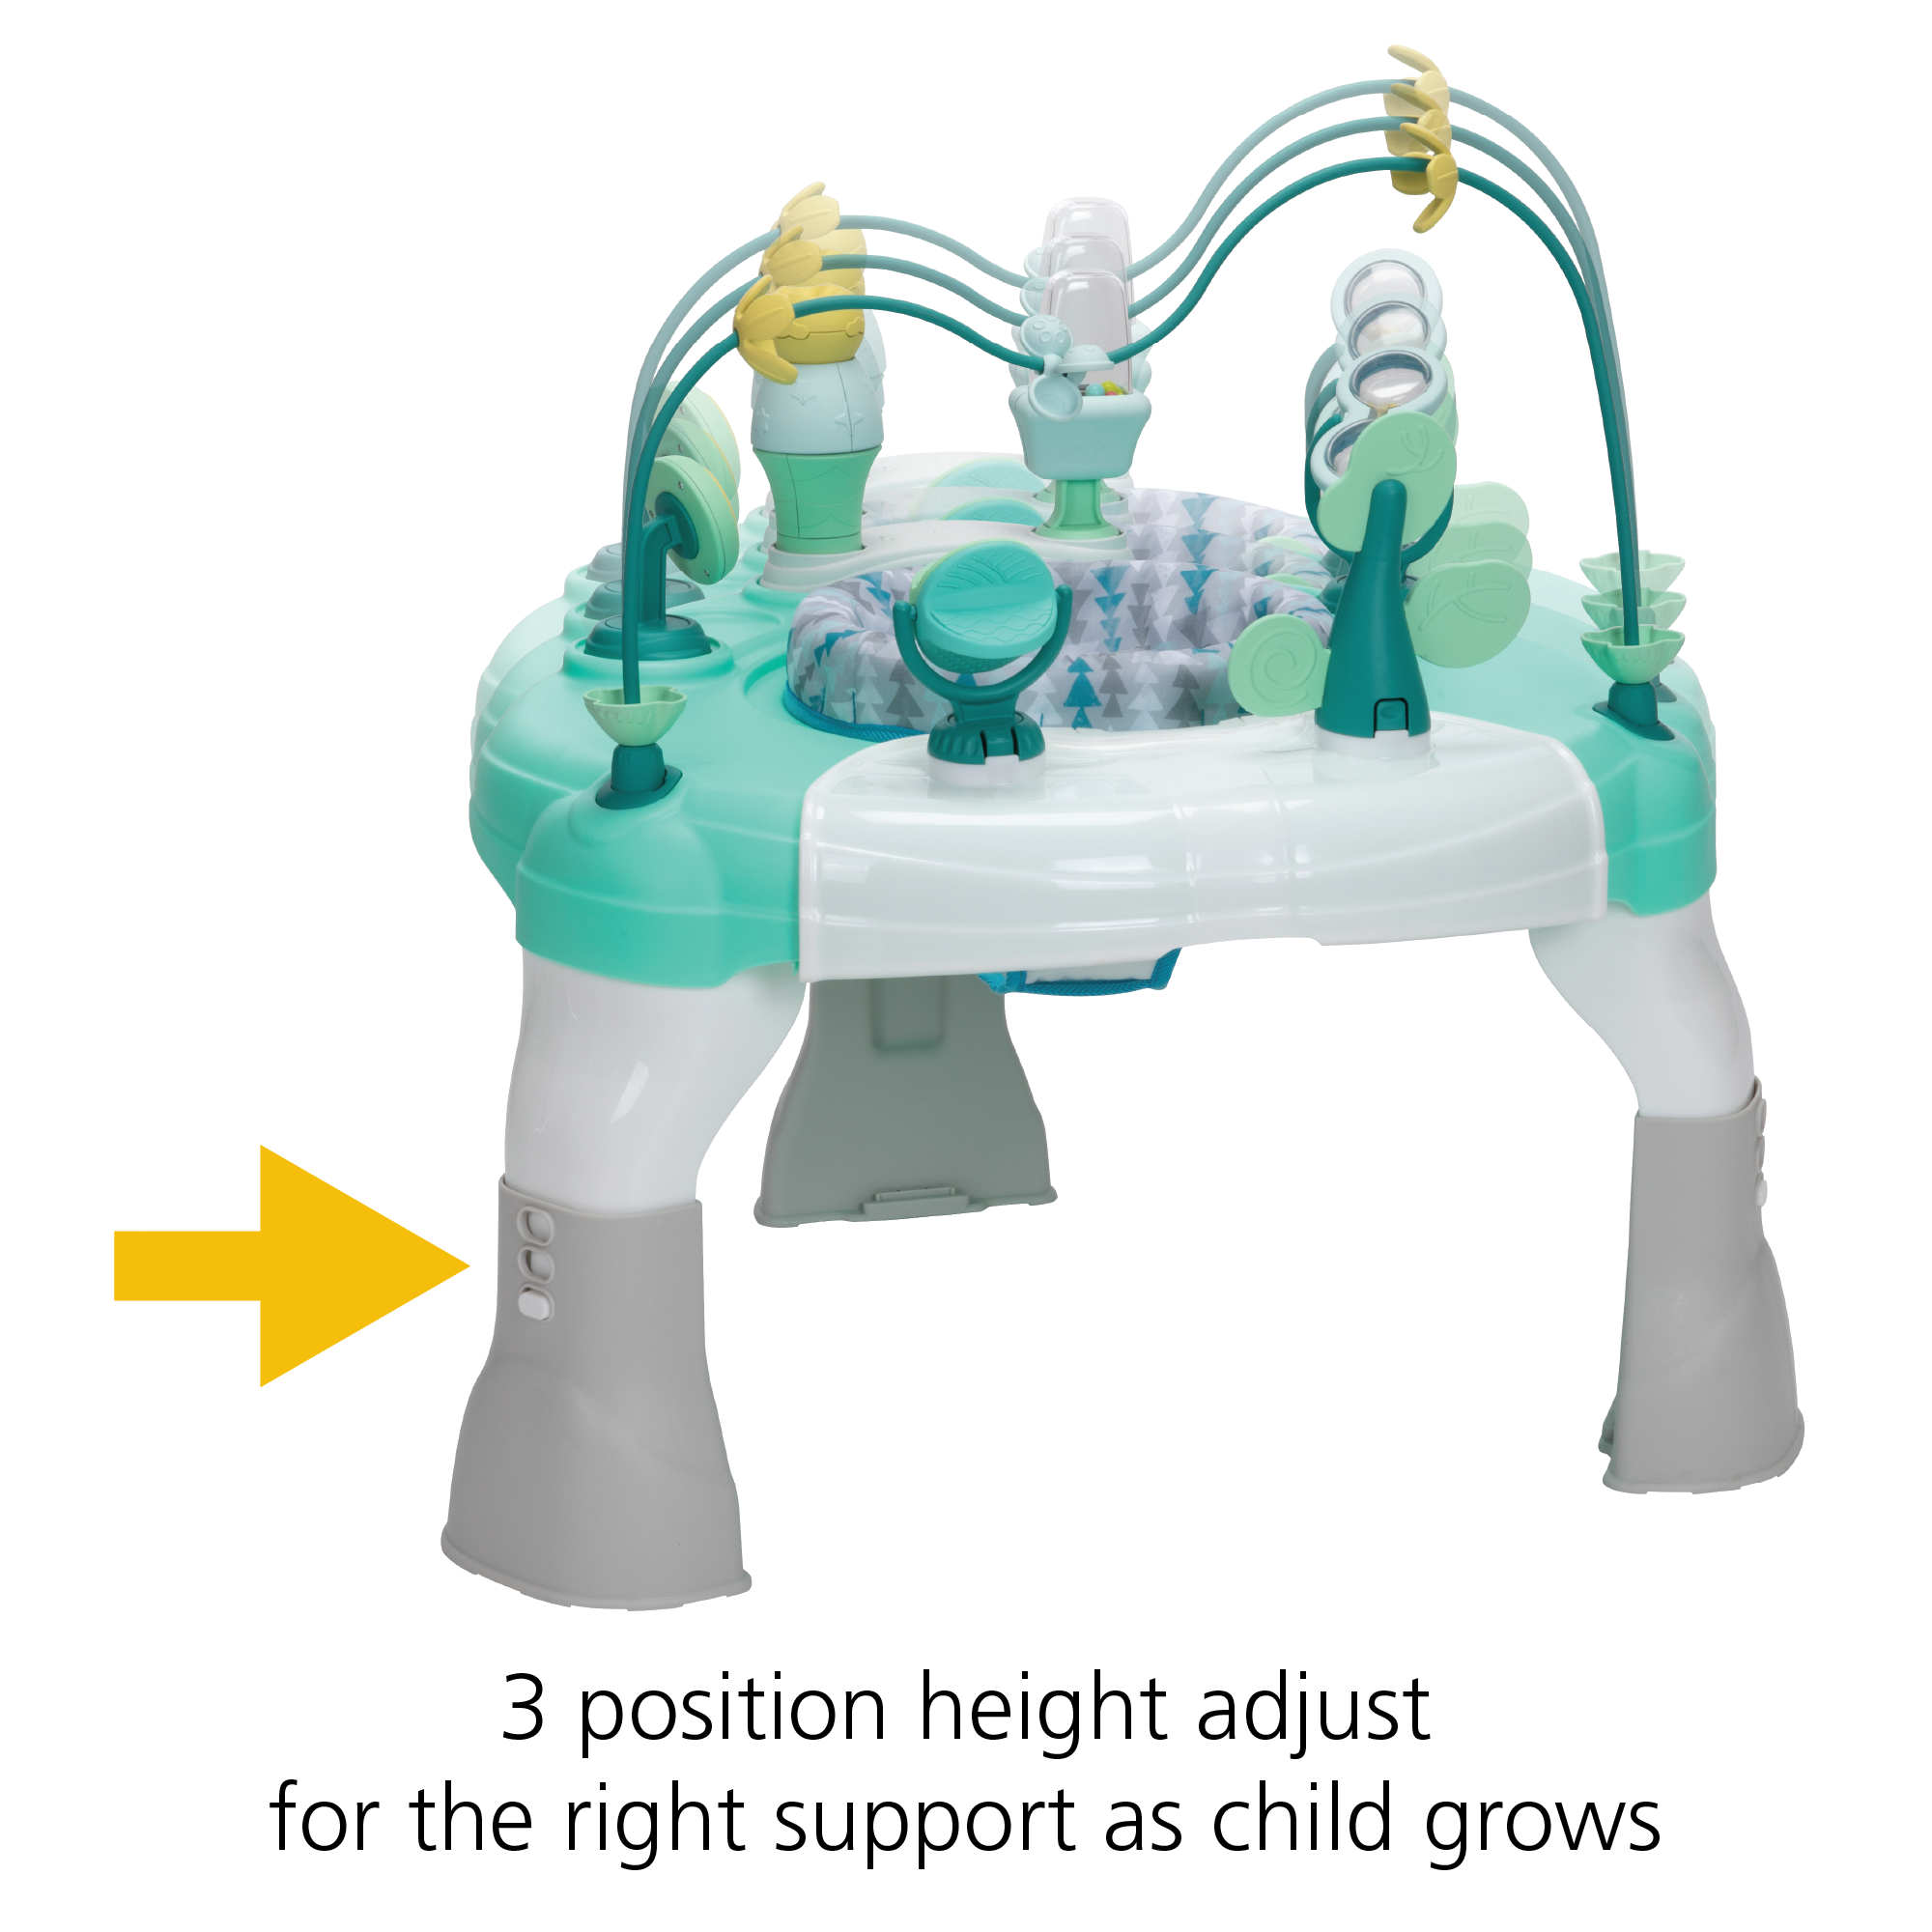 3 position height adjust for the right support as child grows